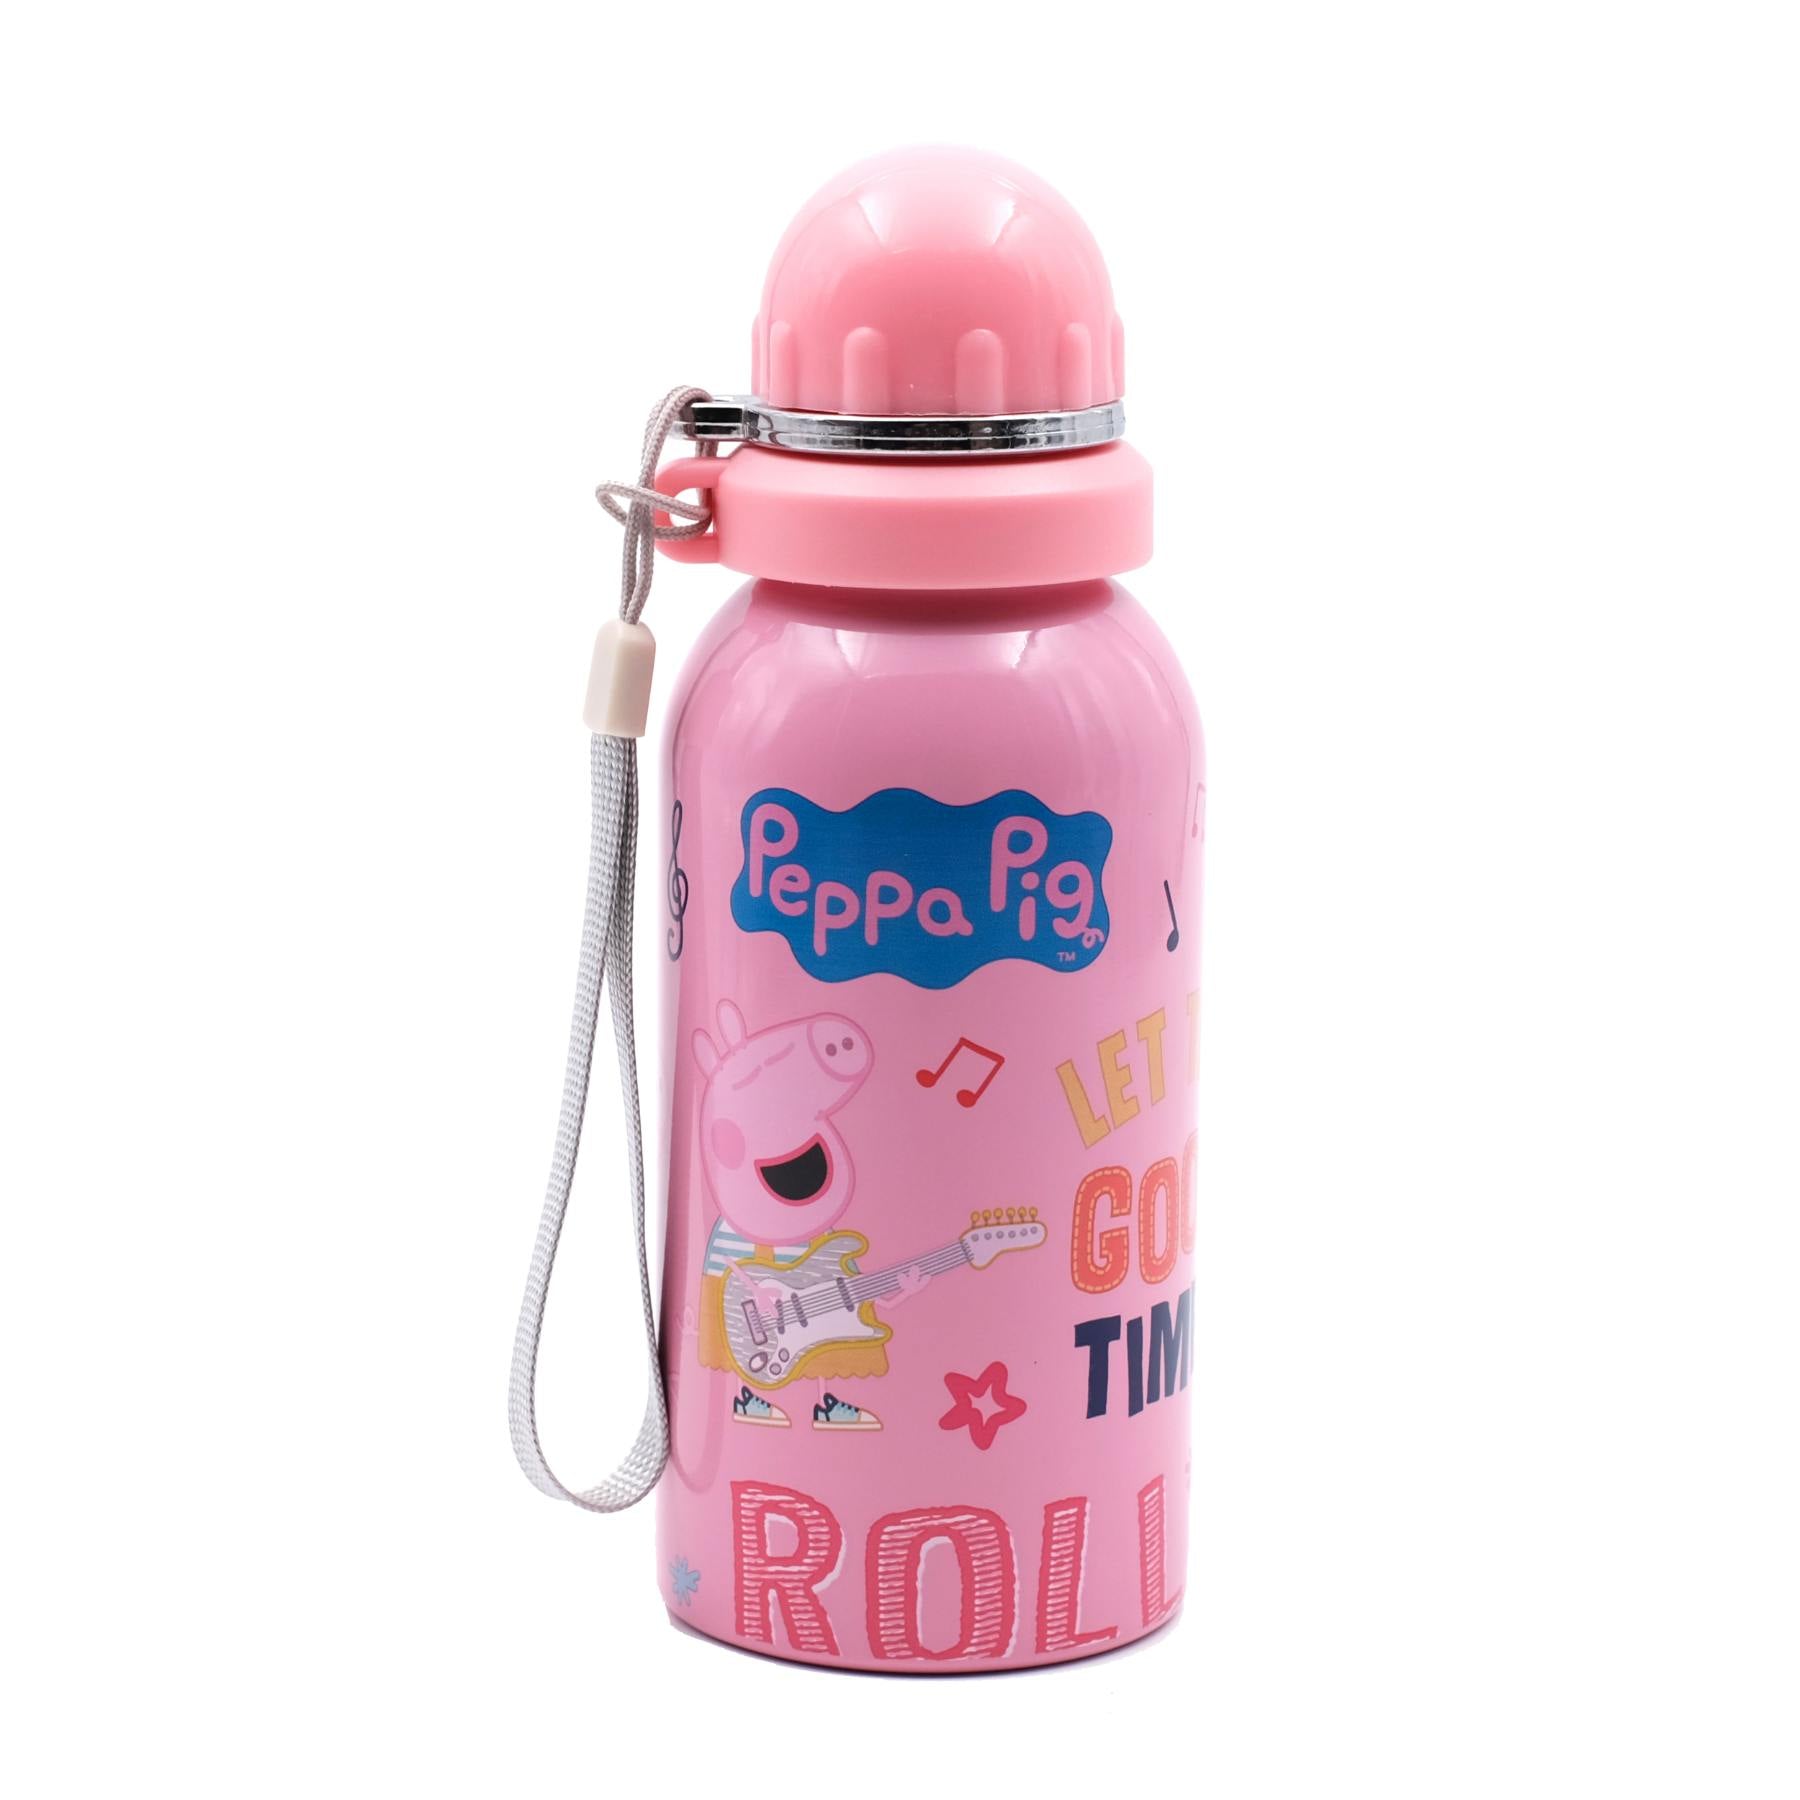 Youp Stainless Steel Pink Color Peppa Pig Kids Water Bottle HYBRID - 500 Ml